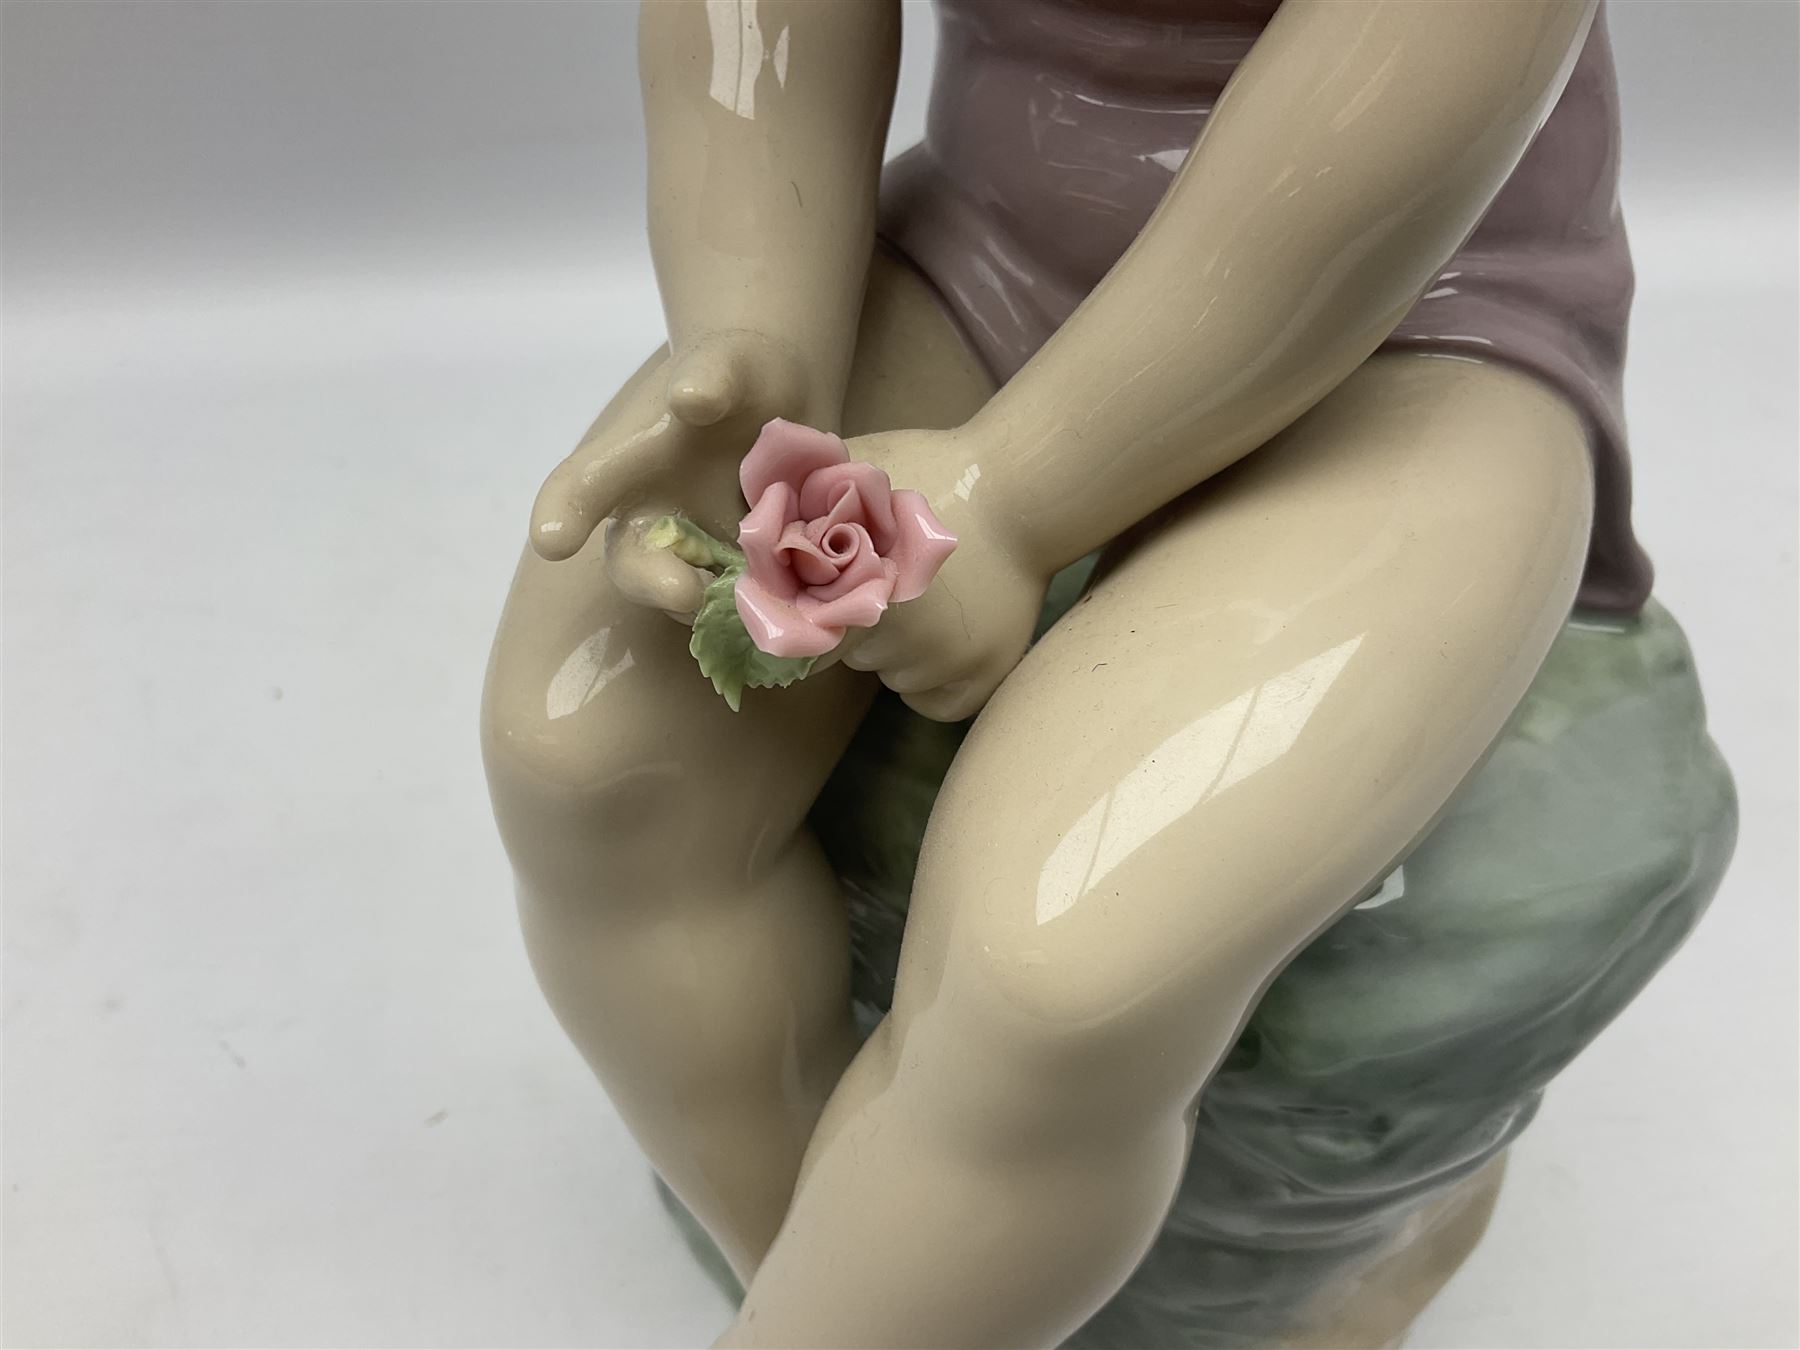 Large Nao figure modelled as a young girl seated upon a rock holding a rose - Image 4 of 6